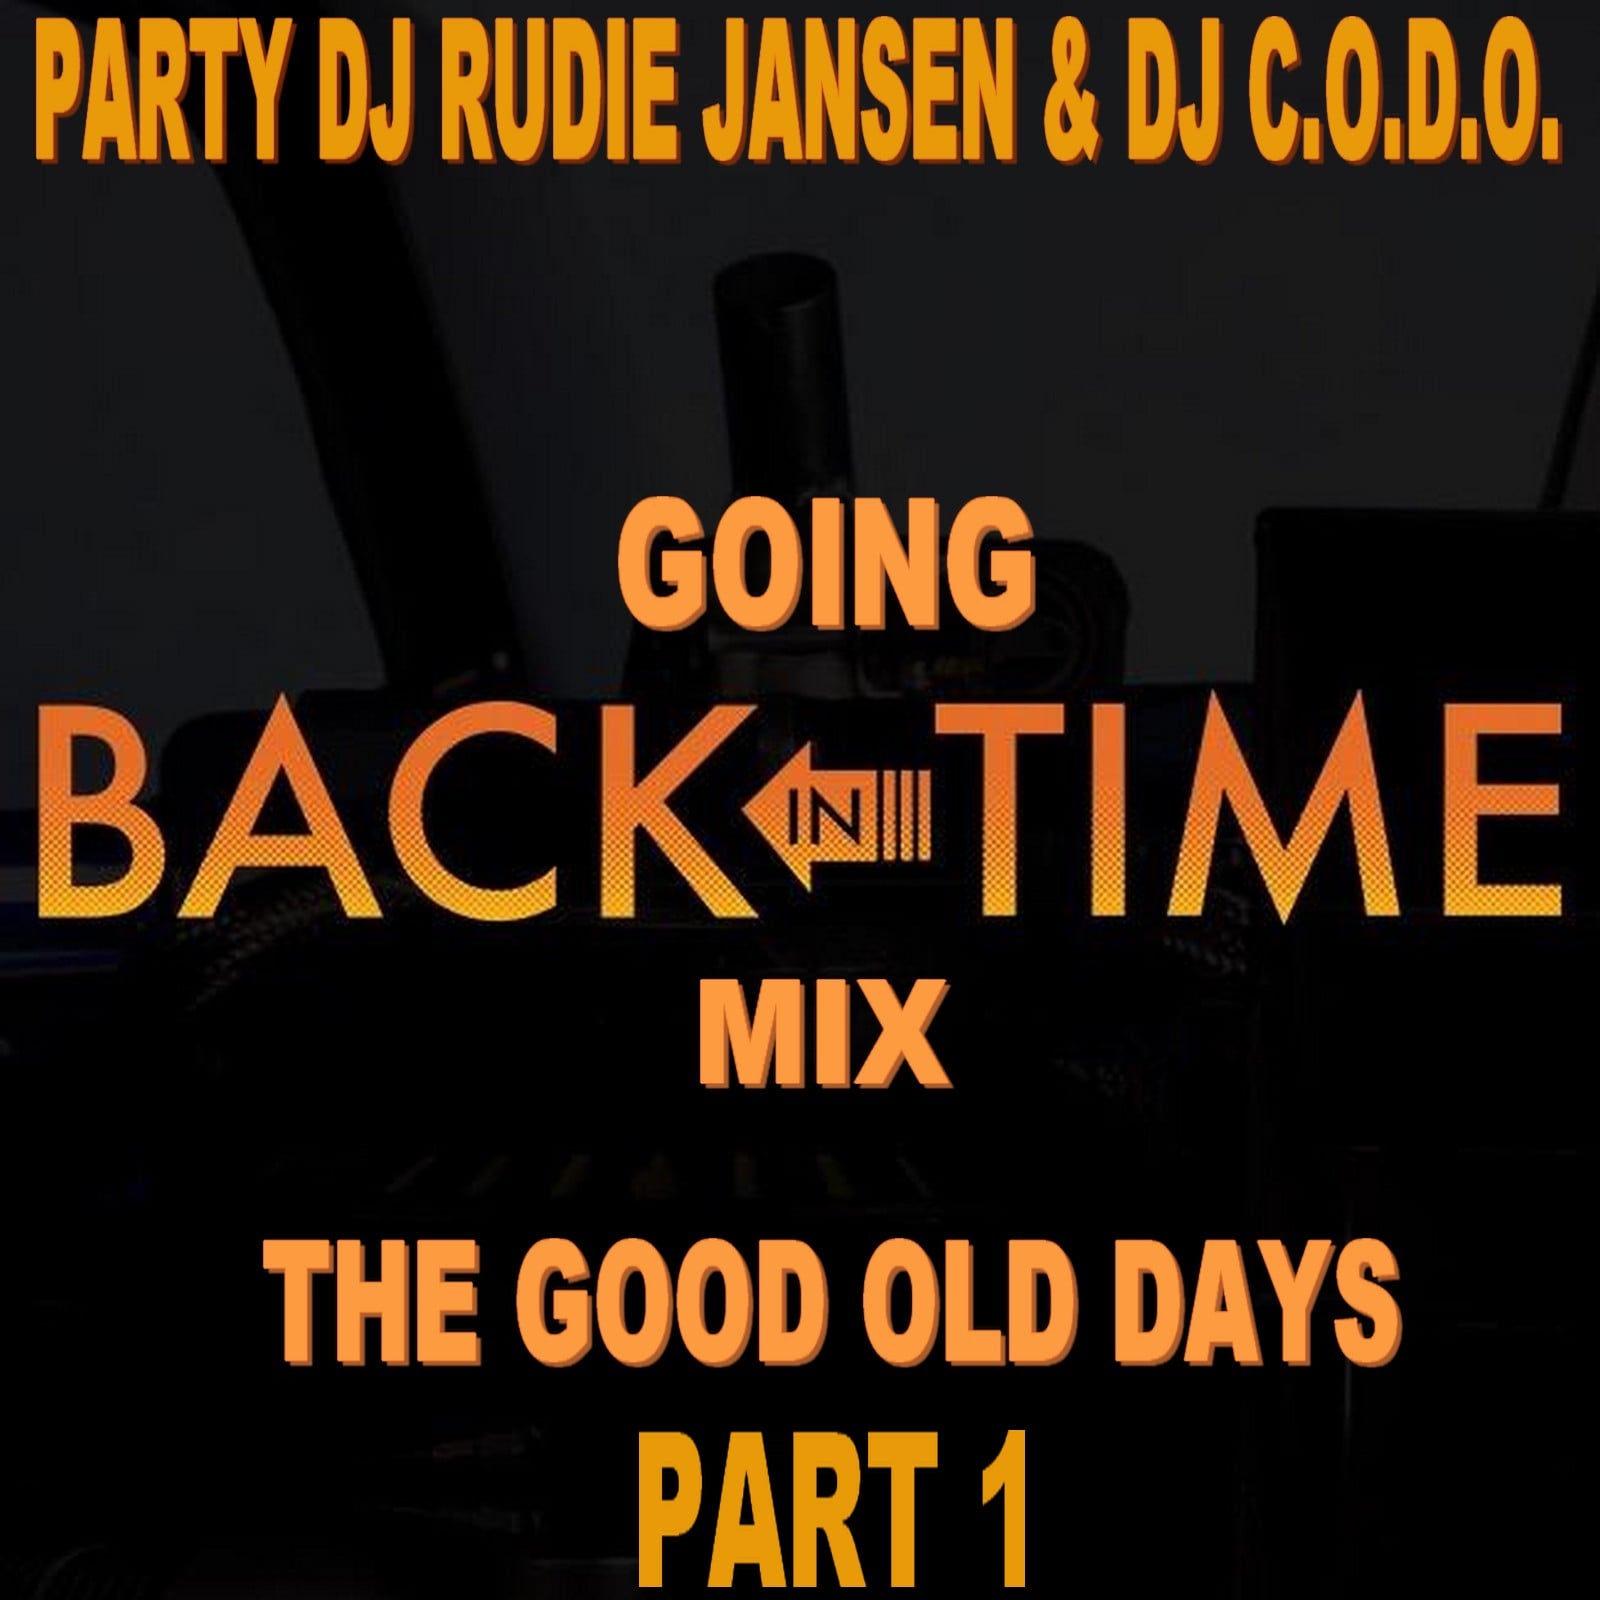 Party DJ Rudie Jansen & DJ C.o.d.O. - Going Back In Time Mix Vol 1 (The Good Old Days) 9424_0e43fc7b8ee7